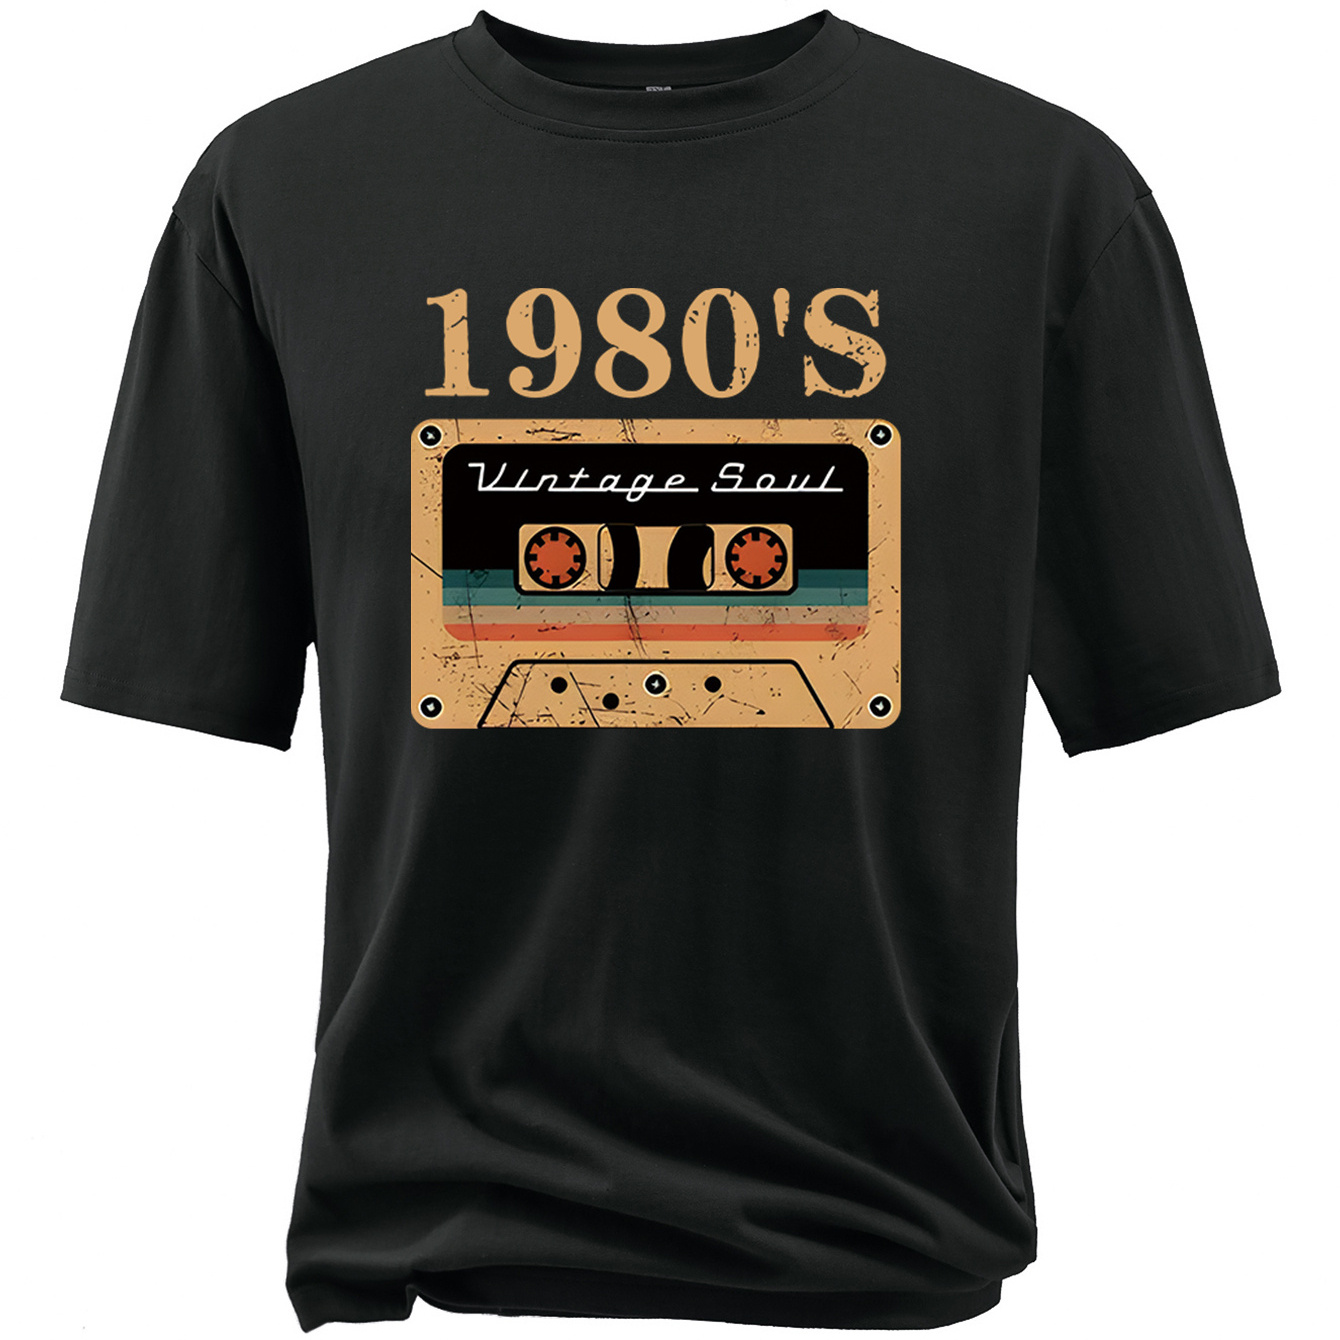 

Plus Size 1980's Cassette Print T-shirt, Men's Casual Comfy Short Sleeve Crew Neck Tee, Men's Clothing For The Big & Tall